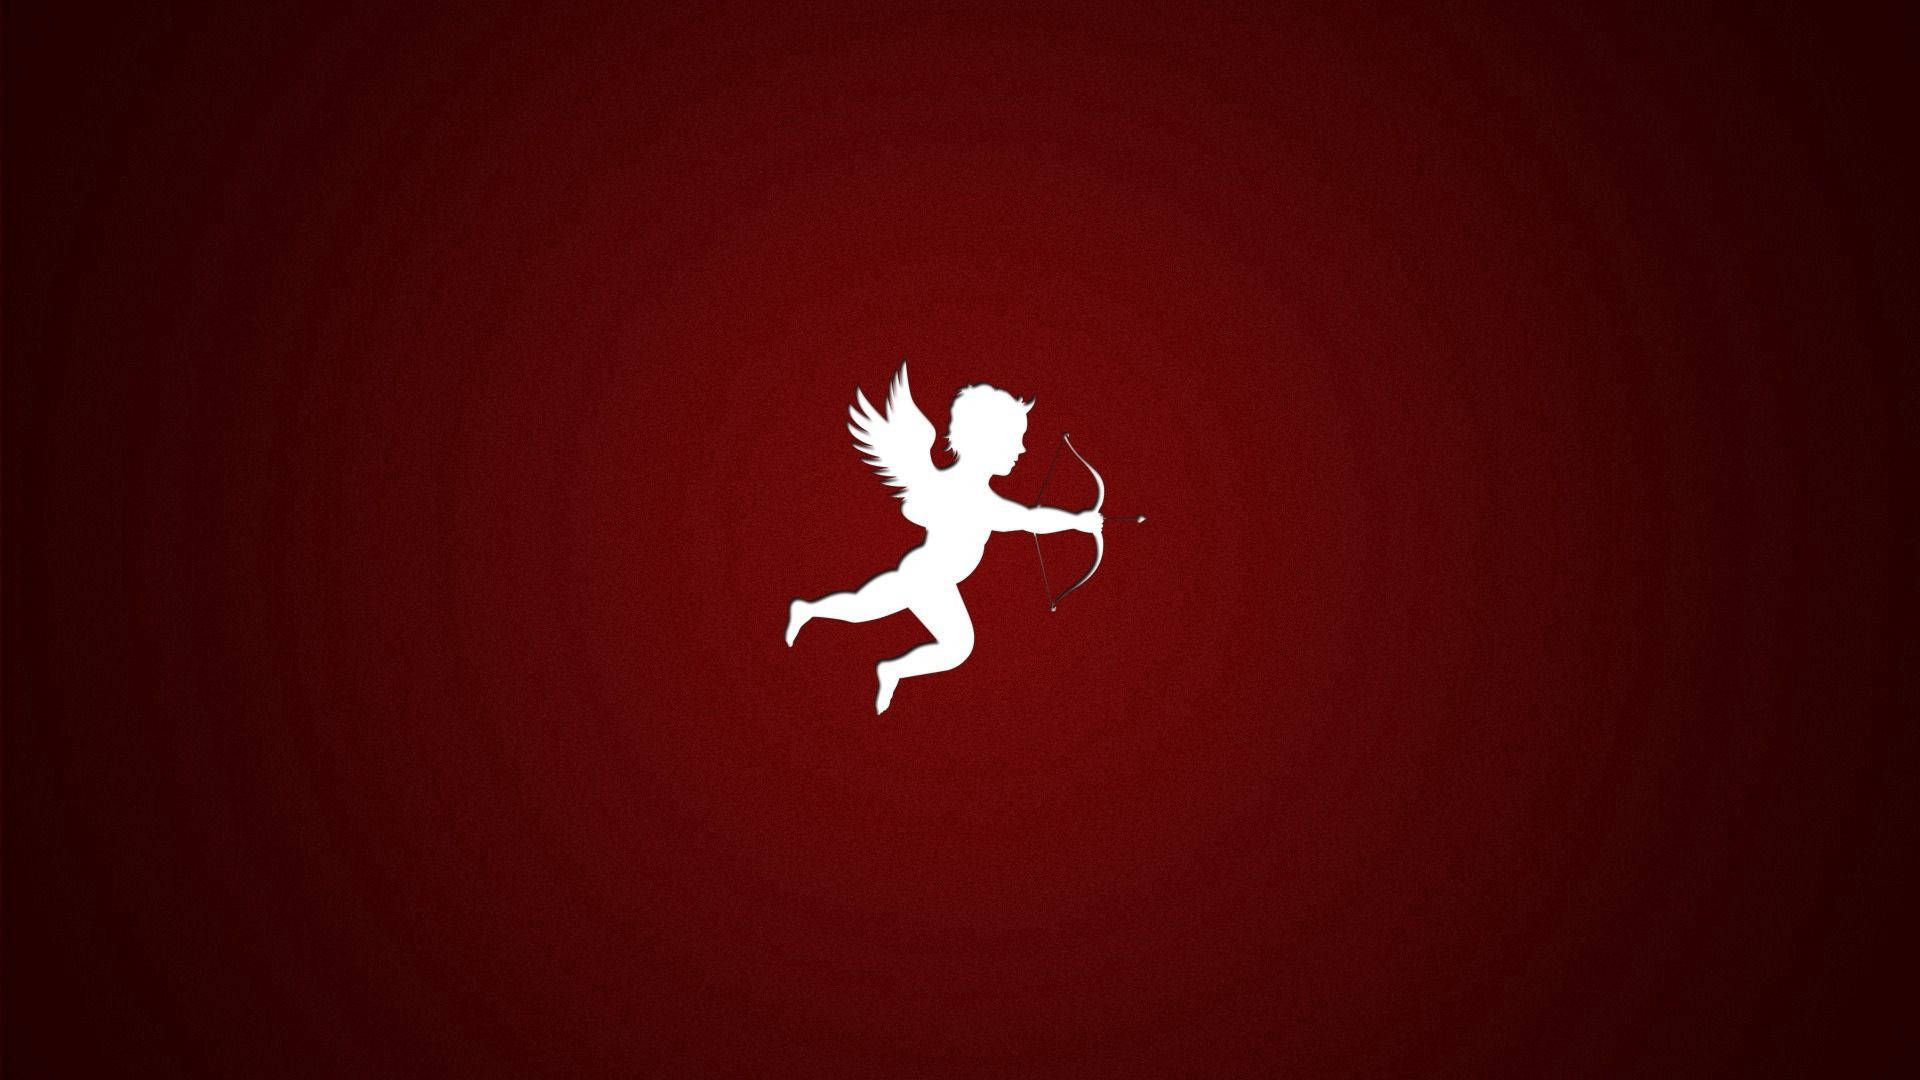 Angels In Heaven Cupid Red Background Wallpaper